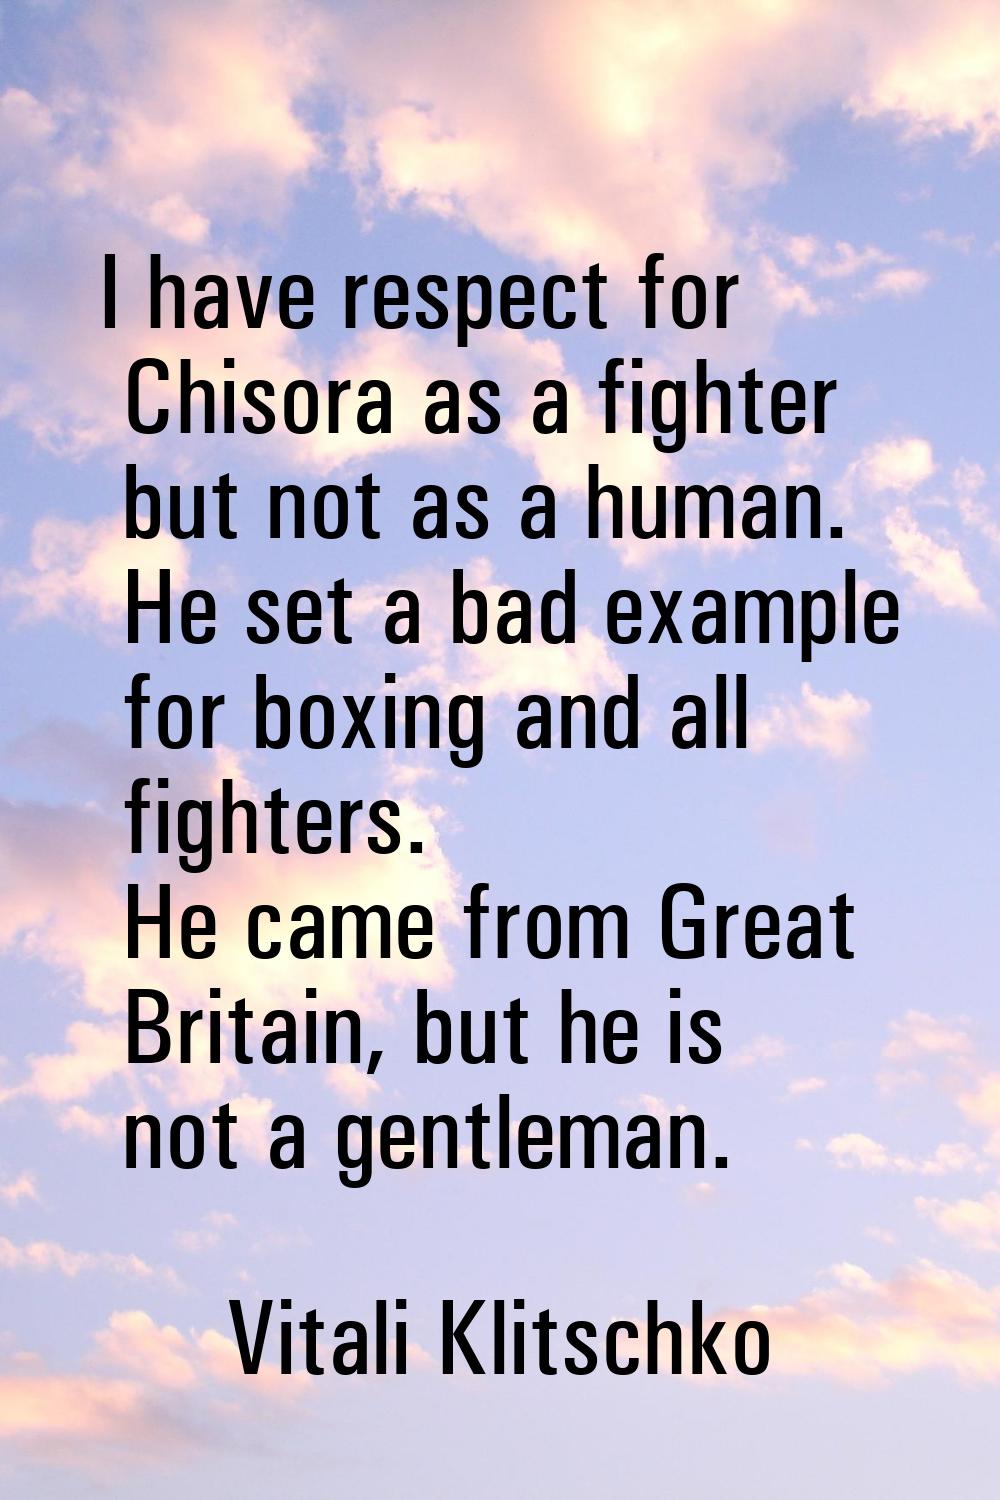 I have respect for Chisora as a fighter but not as a human. He set a bad example for boxing and all